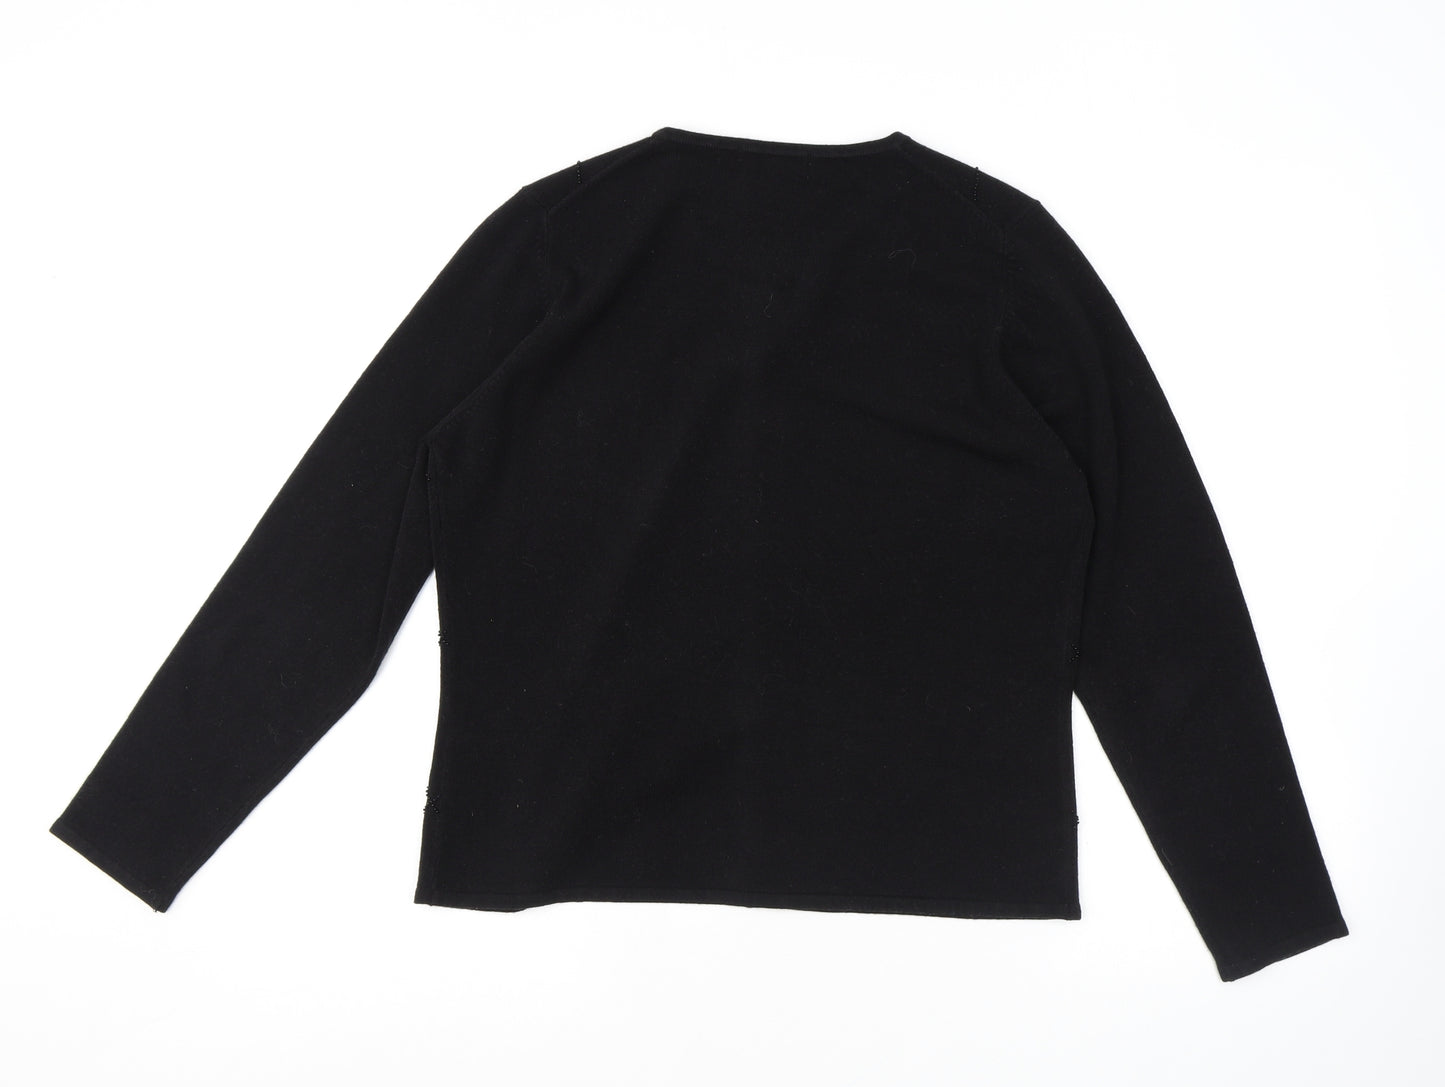 Marks and Spencer Womens Black Round Neck Acrylic Cardigan Jumper Size 16